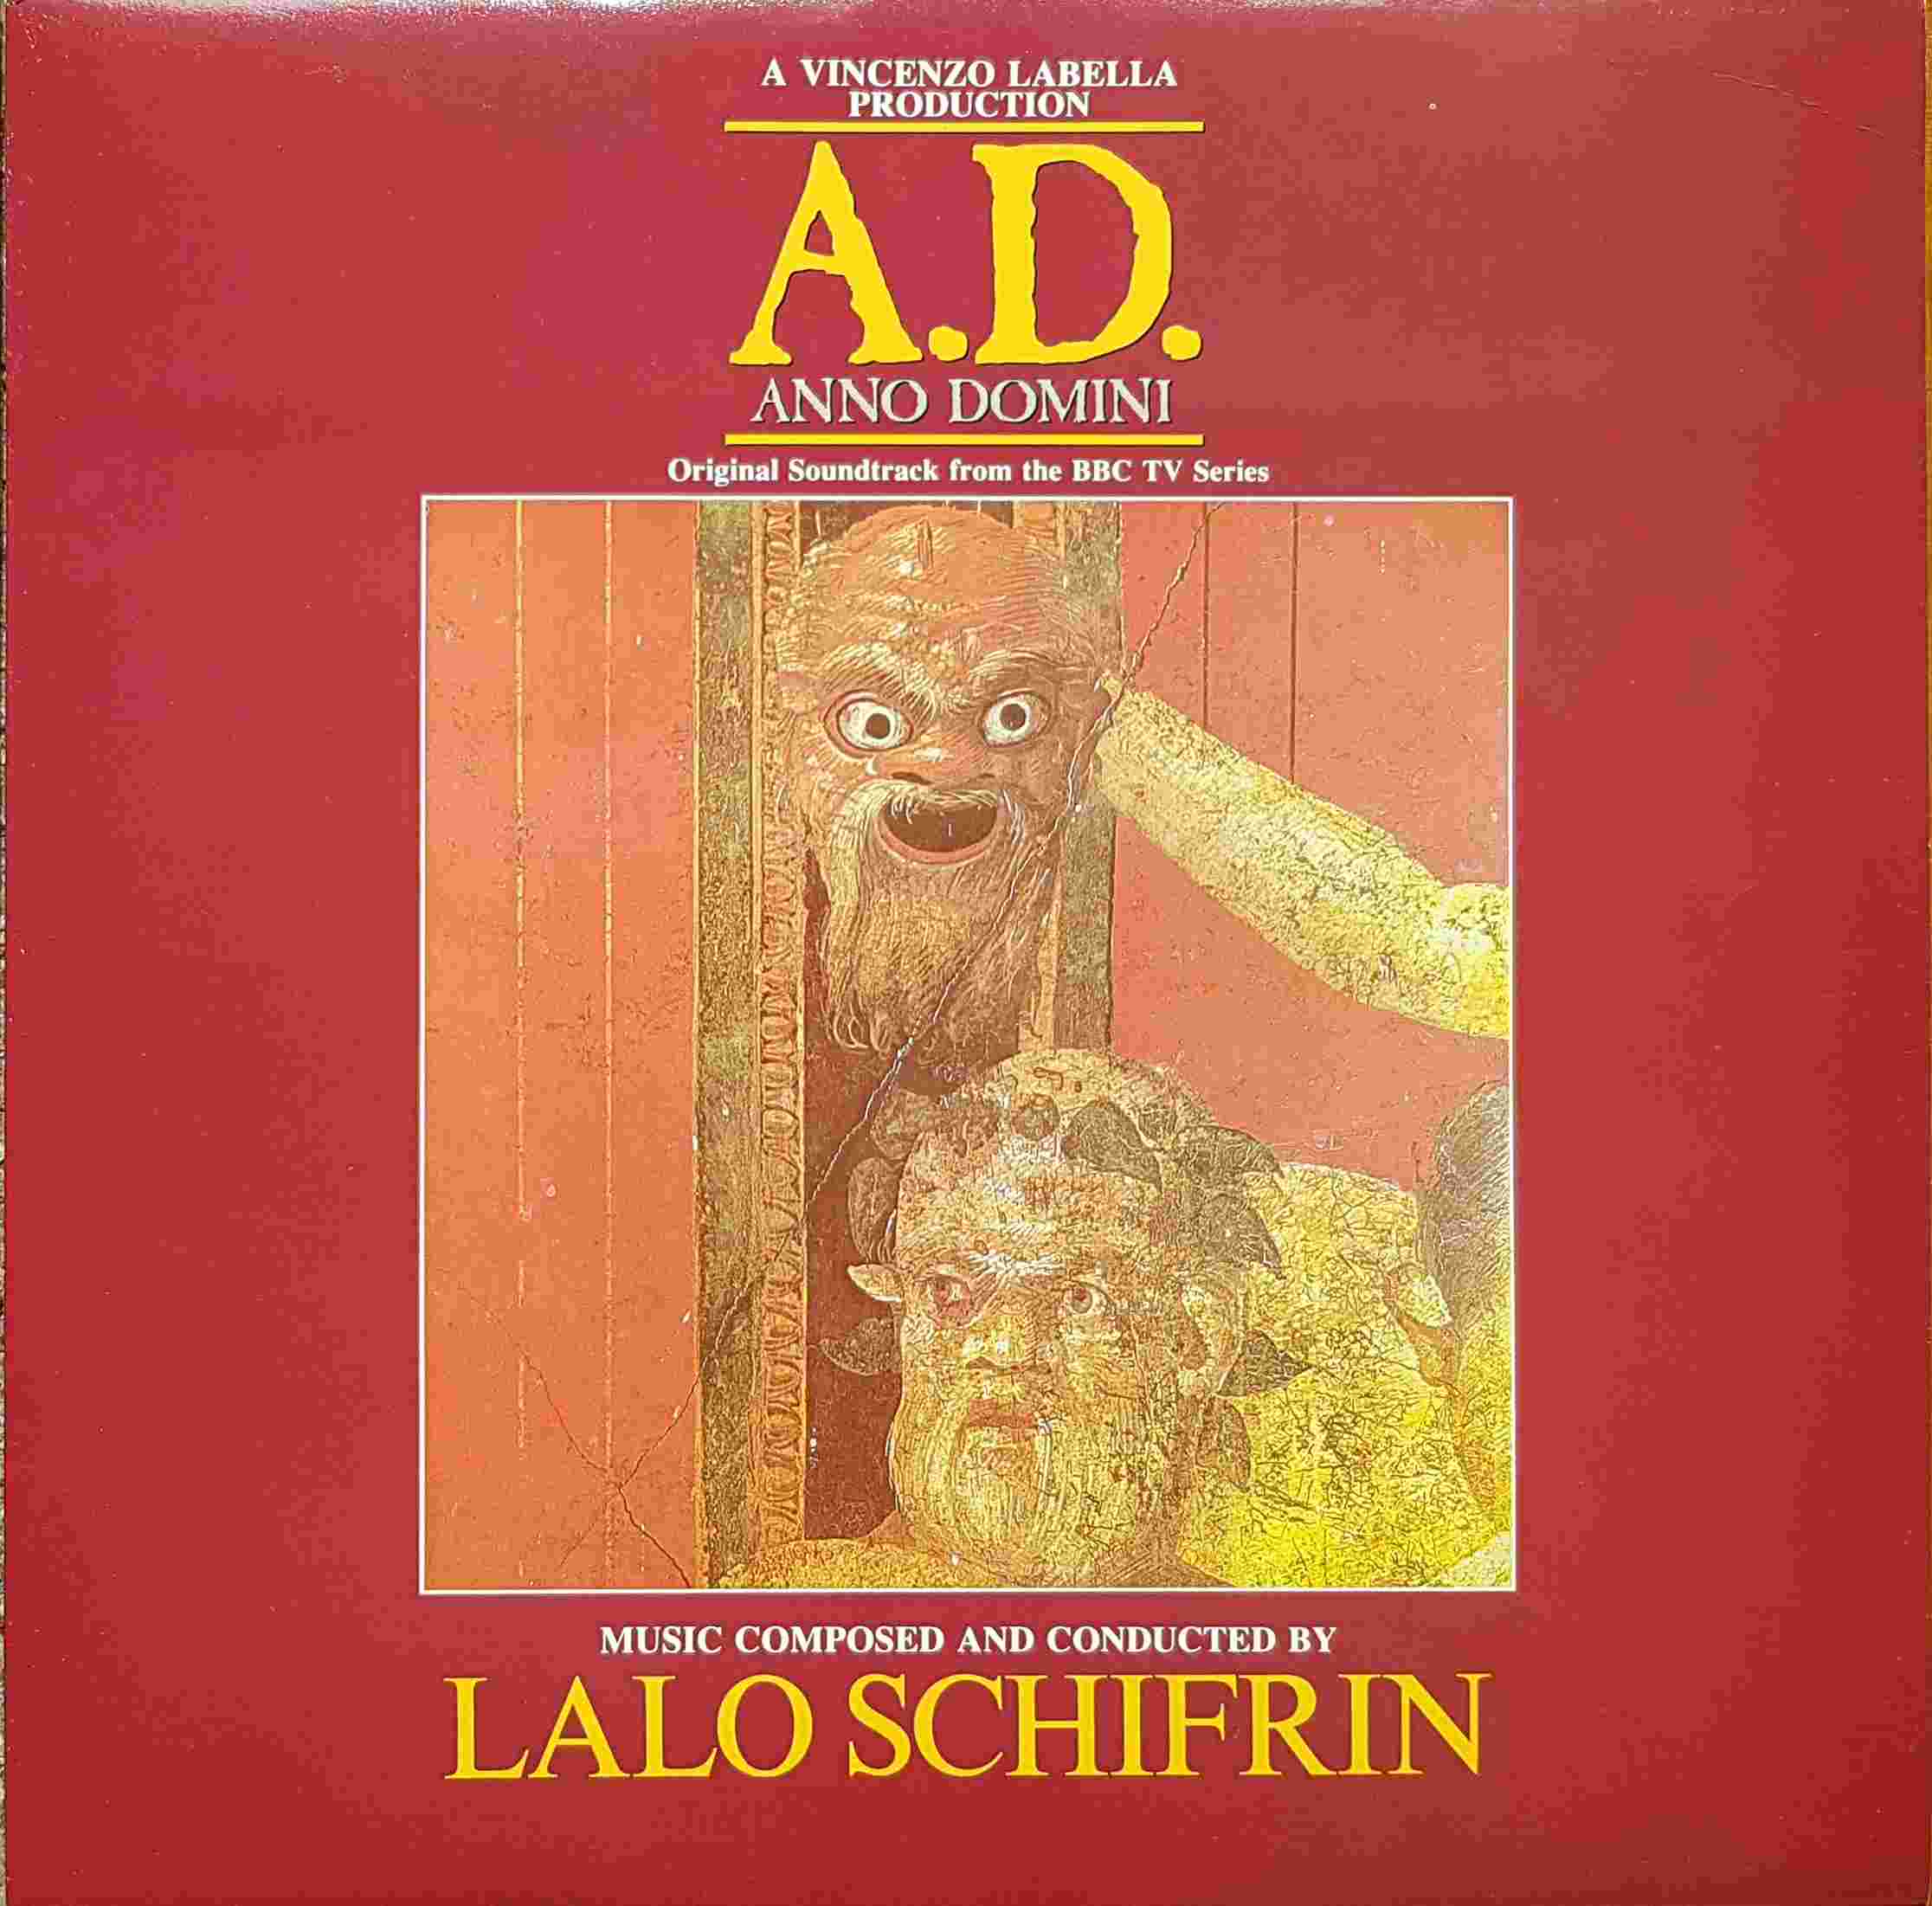 Picture of REB 561 A. D. Anno Domini by artist Lalo Schifrin from the BBC albums - Records and Tapes library